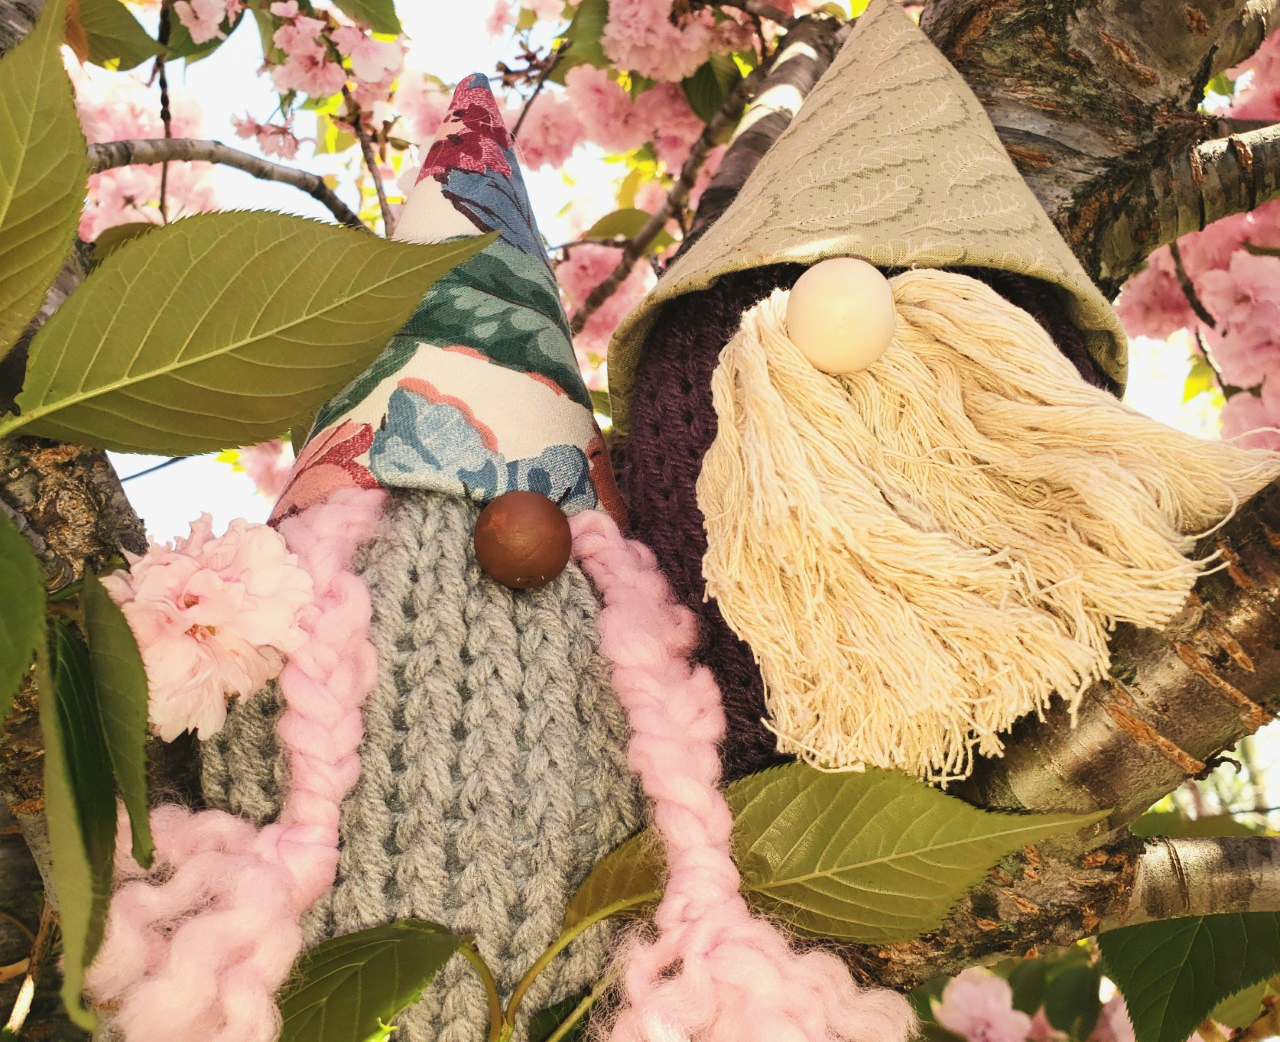 two gnomes crafted from socks in pointed fabric hats sitting in a tree